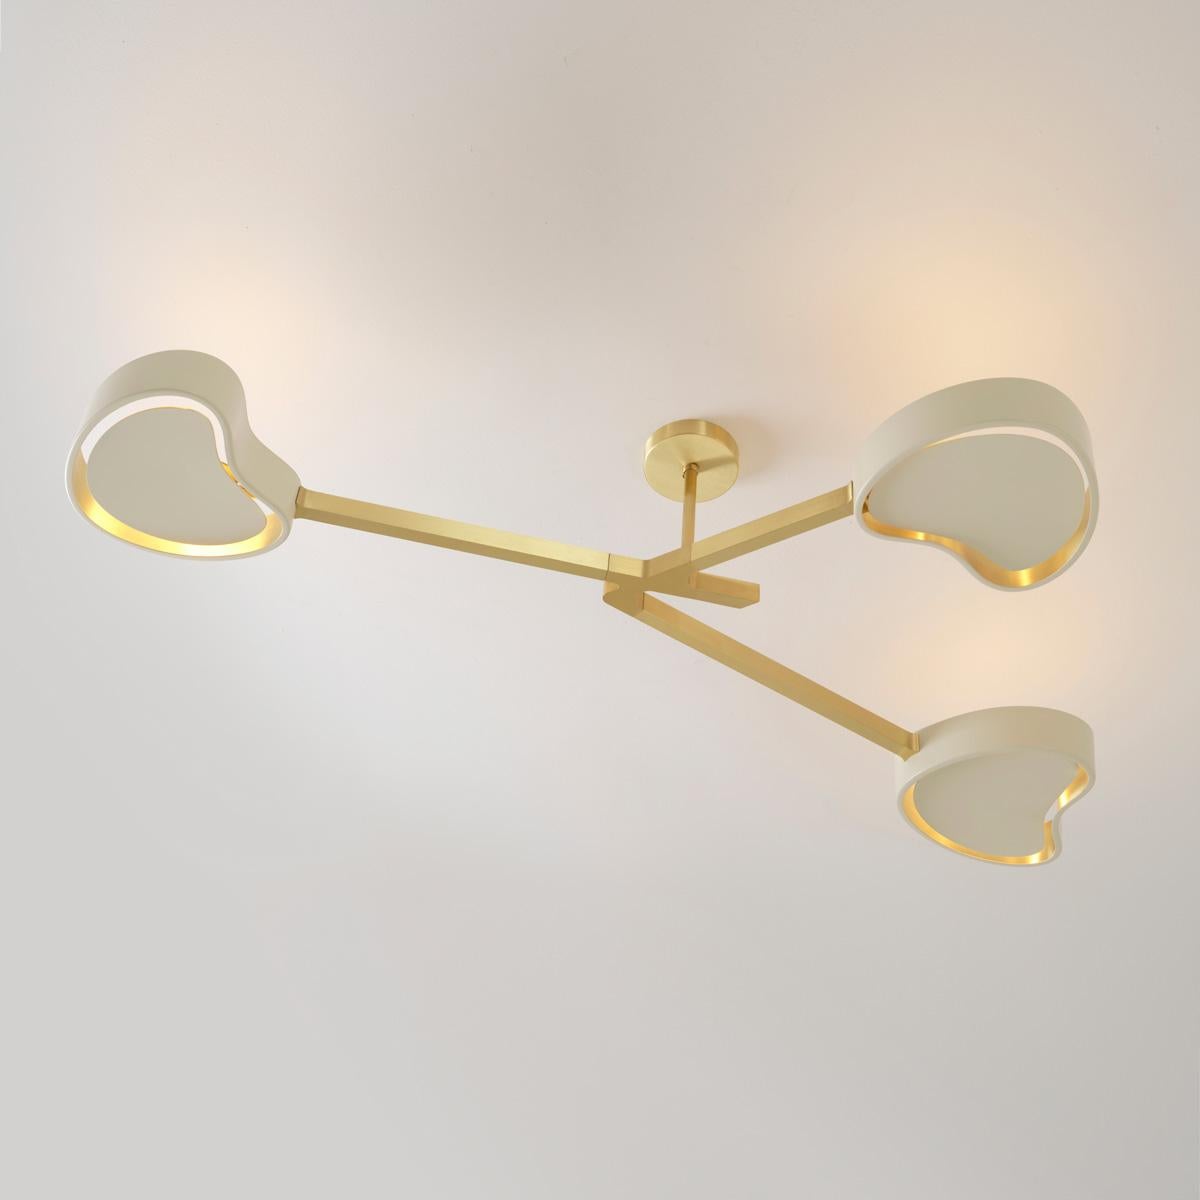 Cuore N.3 Ceiling Light by Gaspare Asaro. Peltro and Bronze Finish For Sale 1